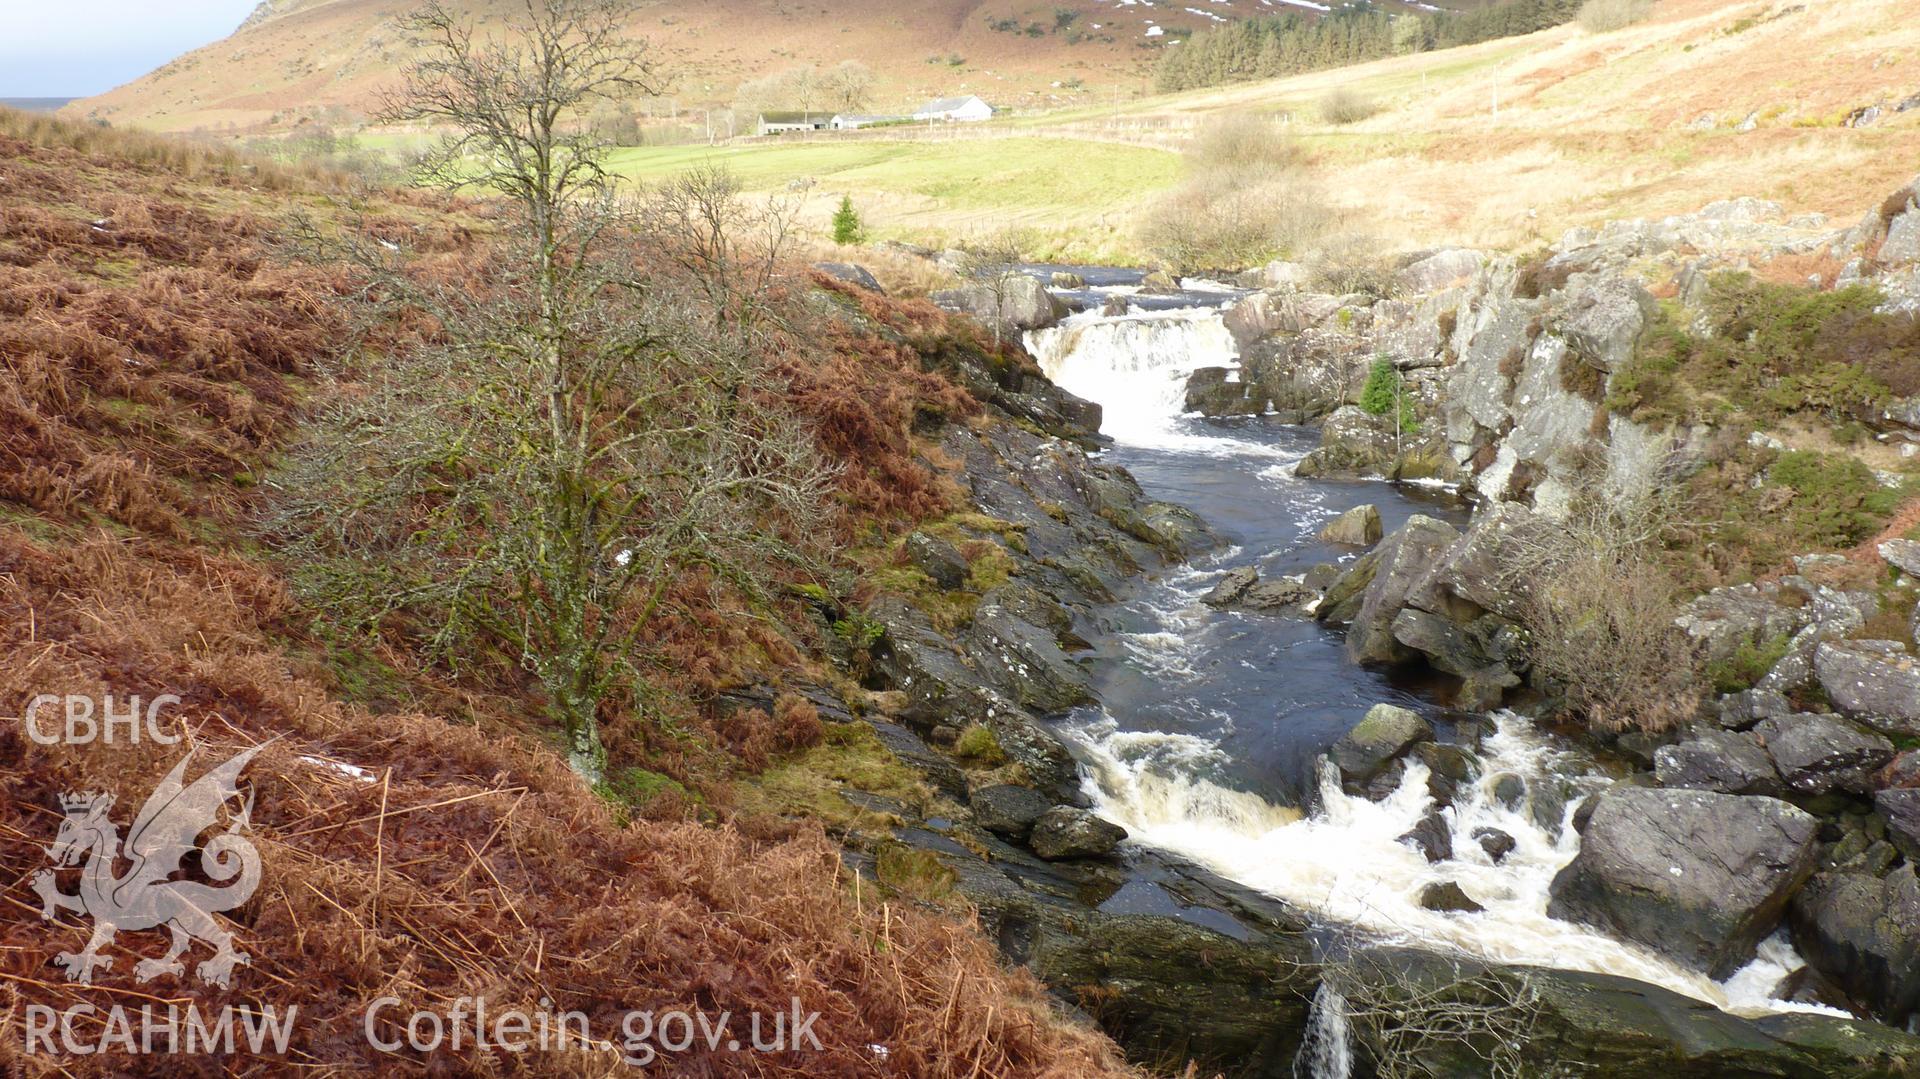 View along stretch of Afon Claerwen & location of weir, just above waterfall at turn of the river. Photographed for Archaeological Desk Based Assessment of Afon Claerwen, Elan Valley, Rhayader. Assessment by Archaeology Wales, 2017-18. Project no. 2573.